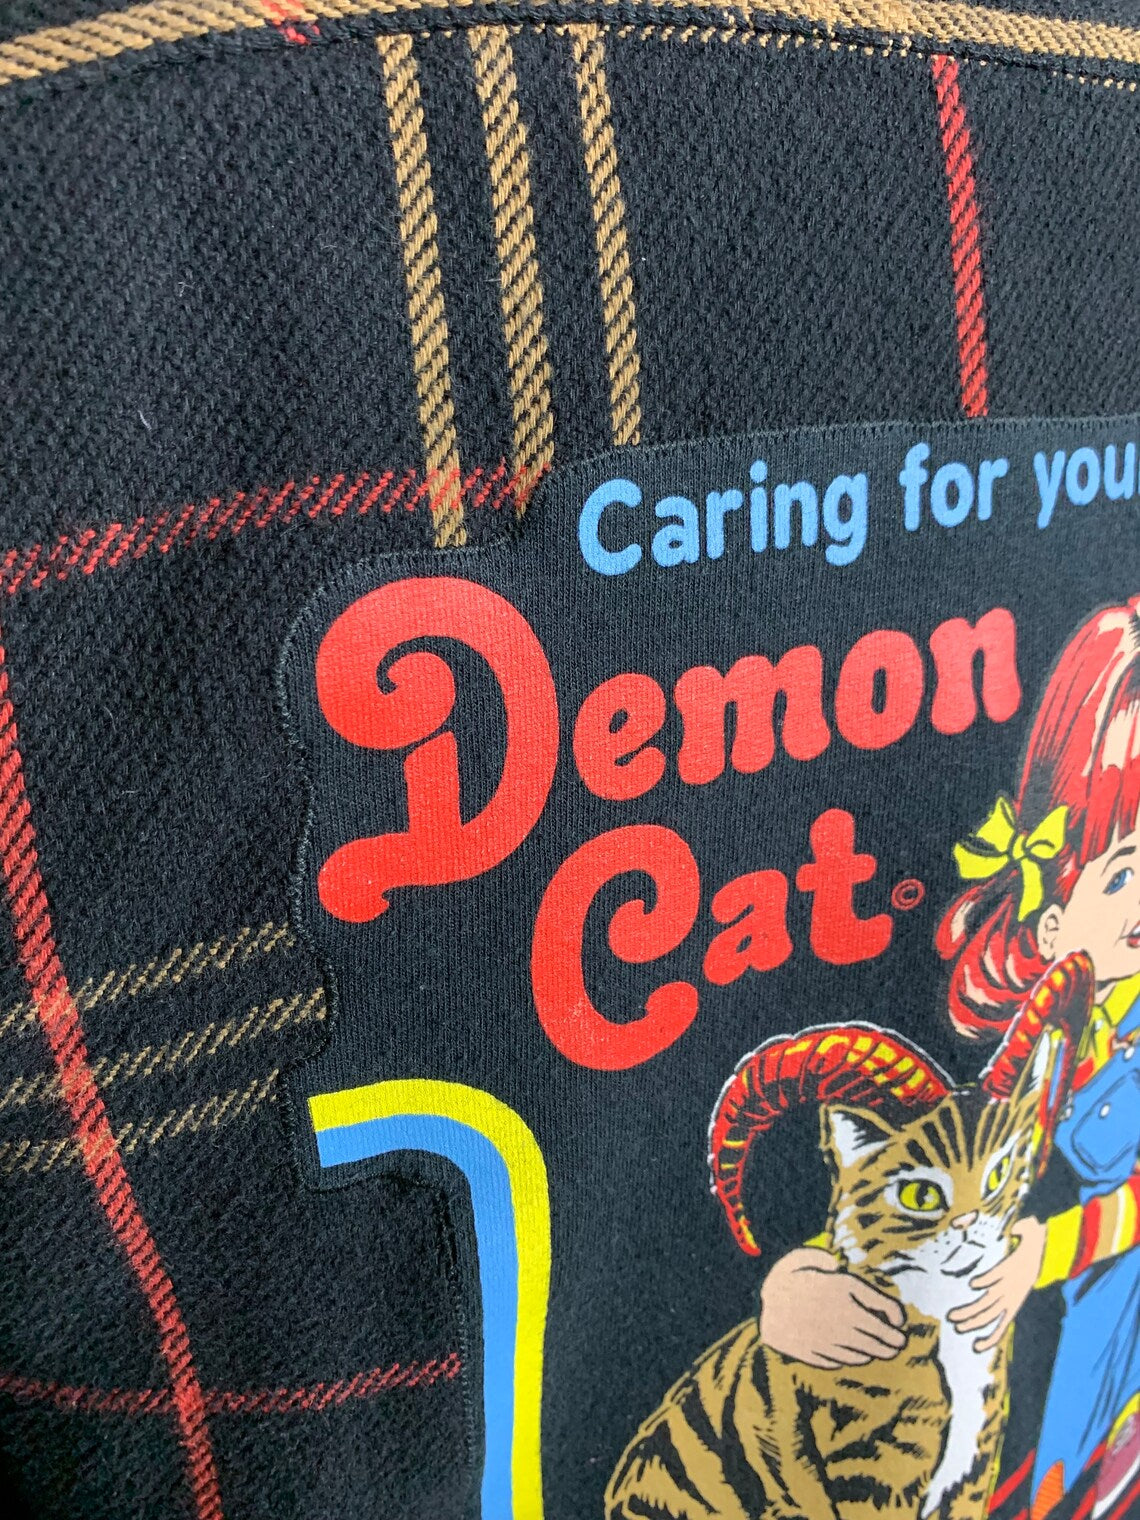 Caring for your Demon Cat Flannel Shirt Custom Rework M